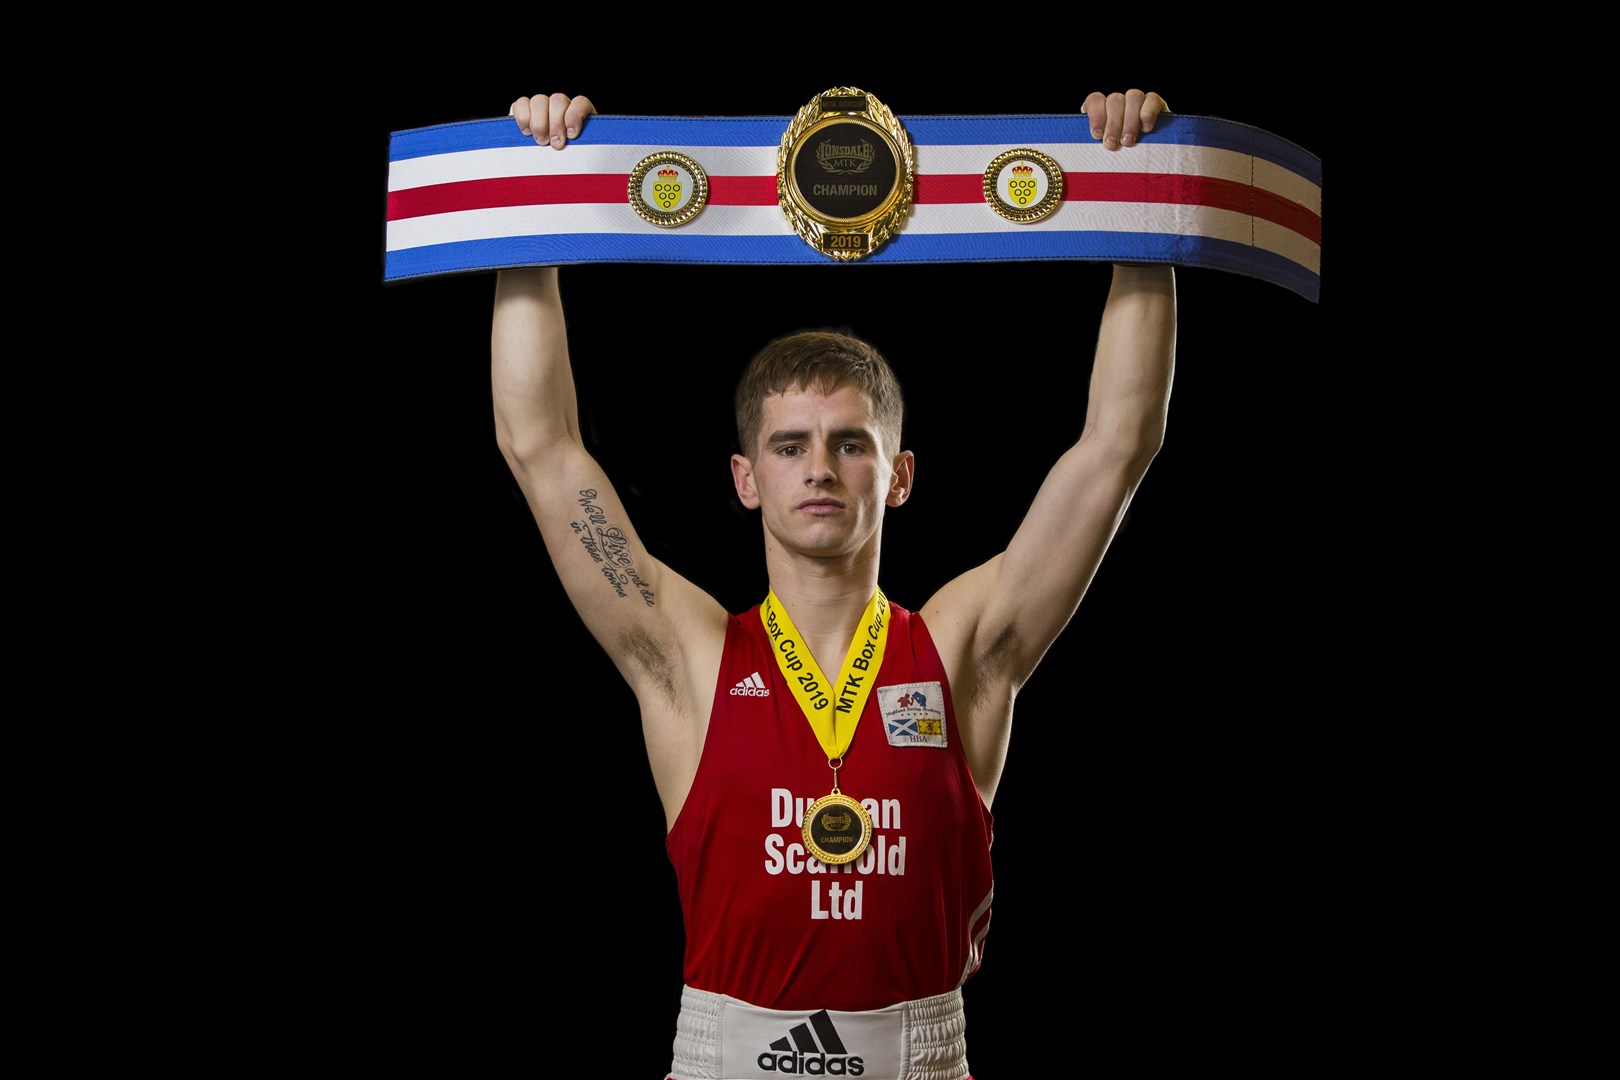 John Duncan took the Lonsdale belt and a gold medal from the Lonsdale Box Cup. Picture: David Rothnie